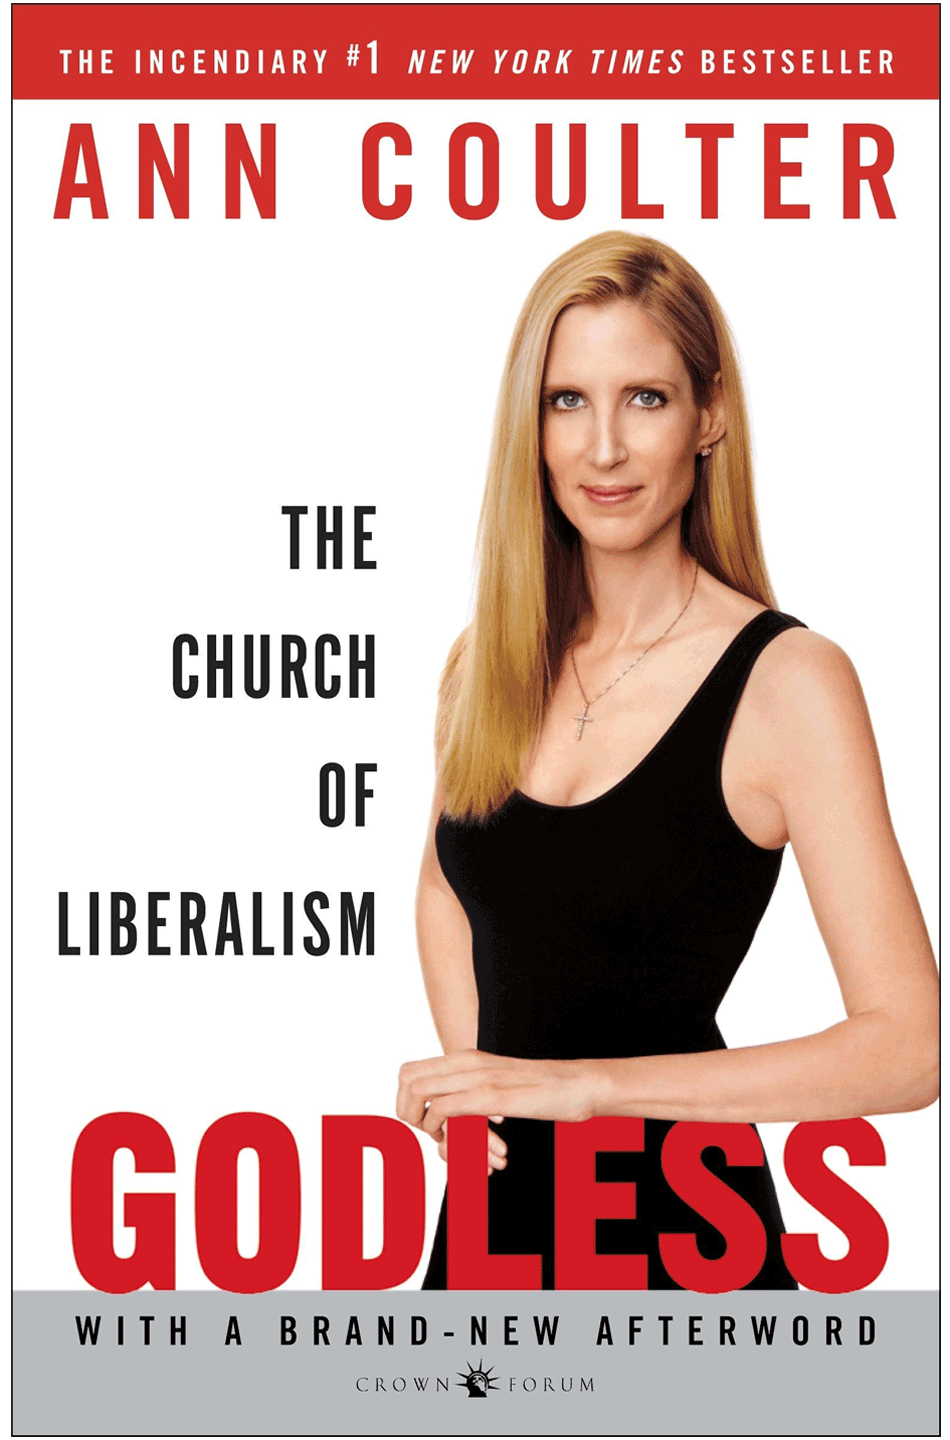 Godless. The Church of Liberalism